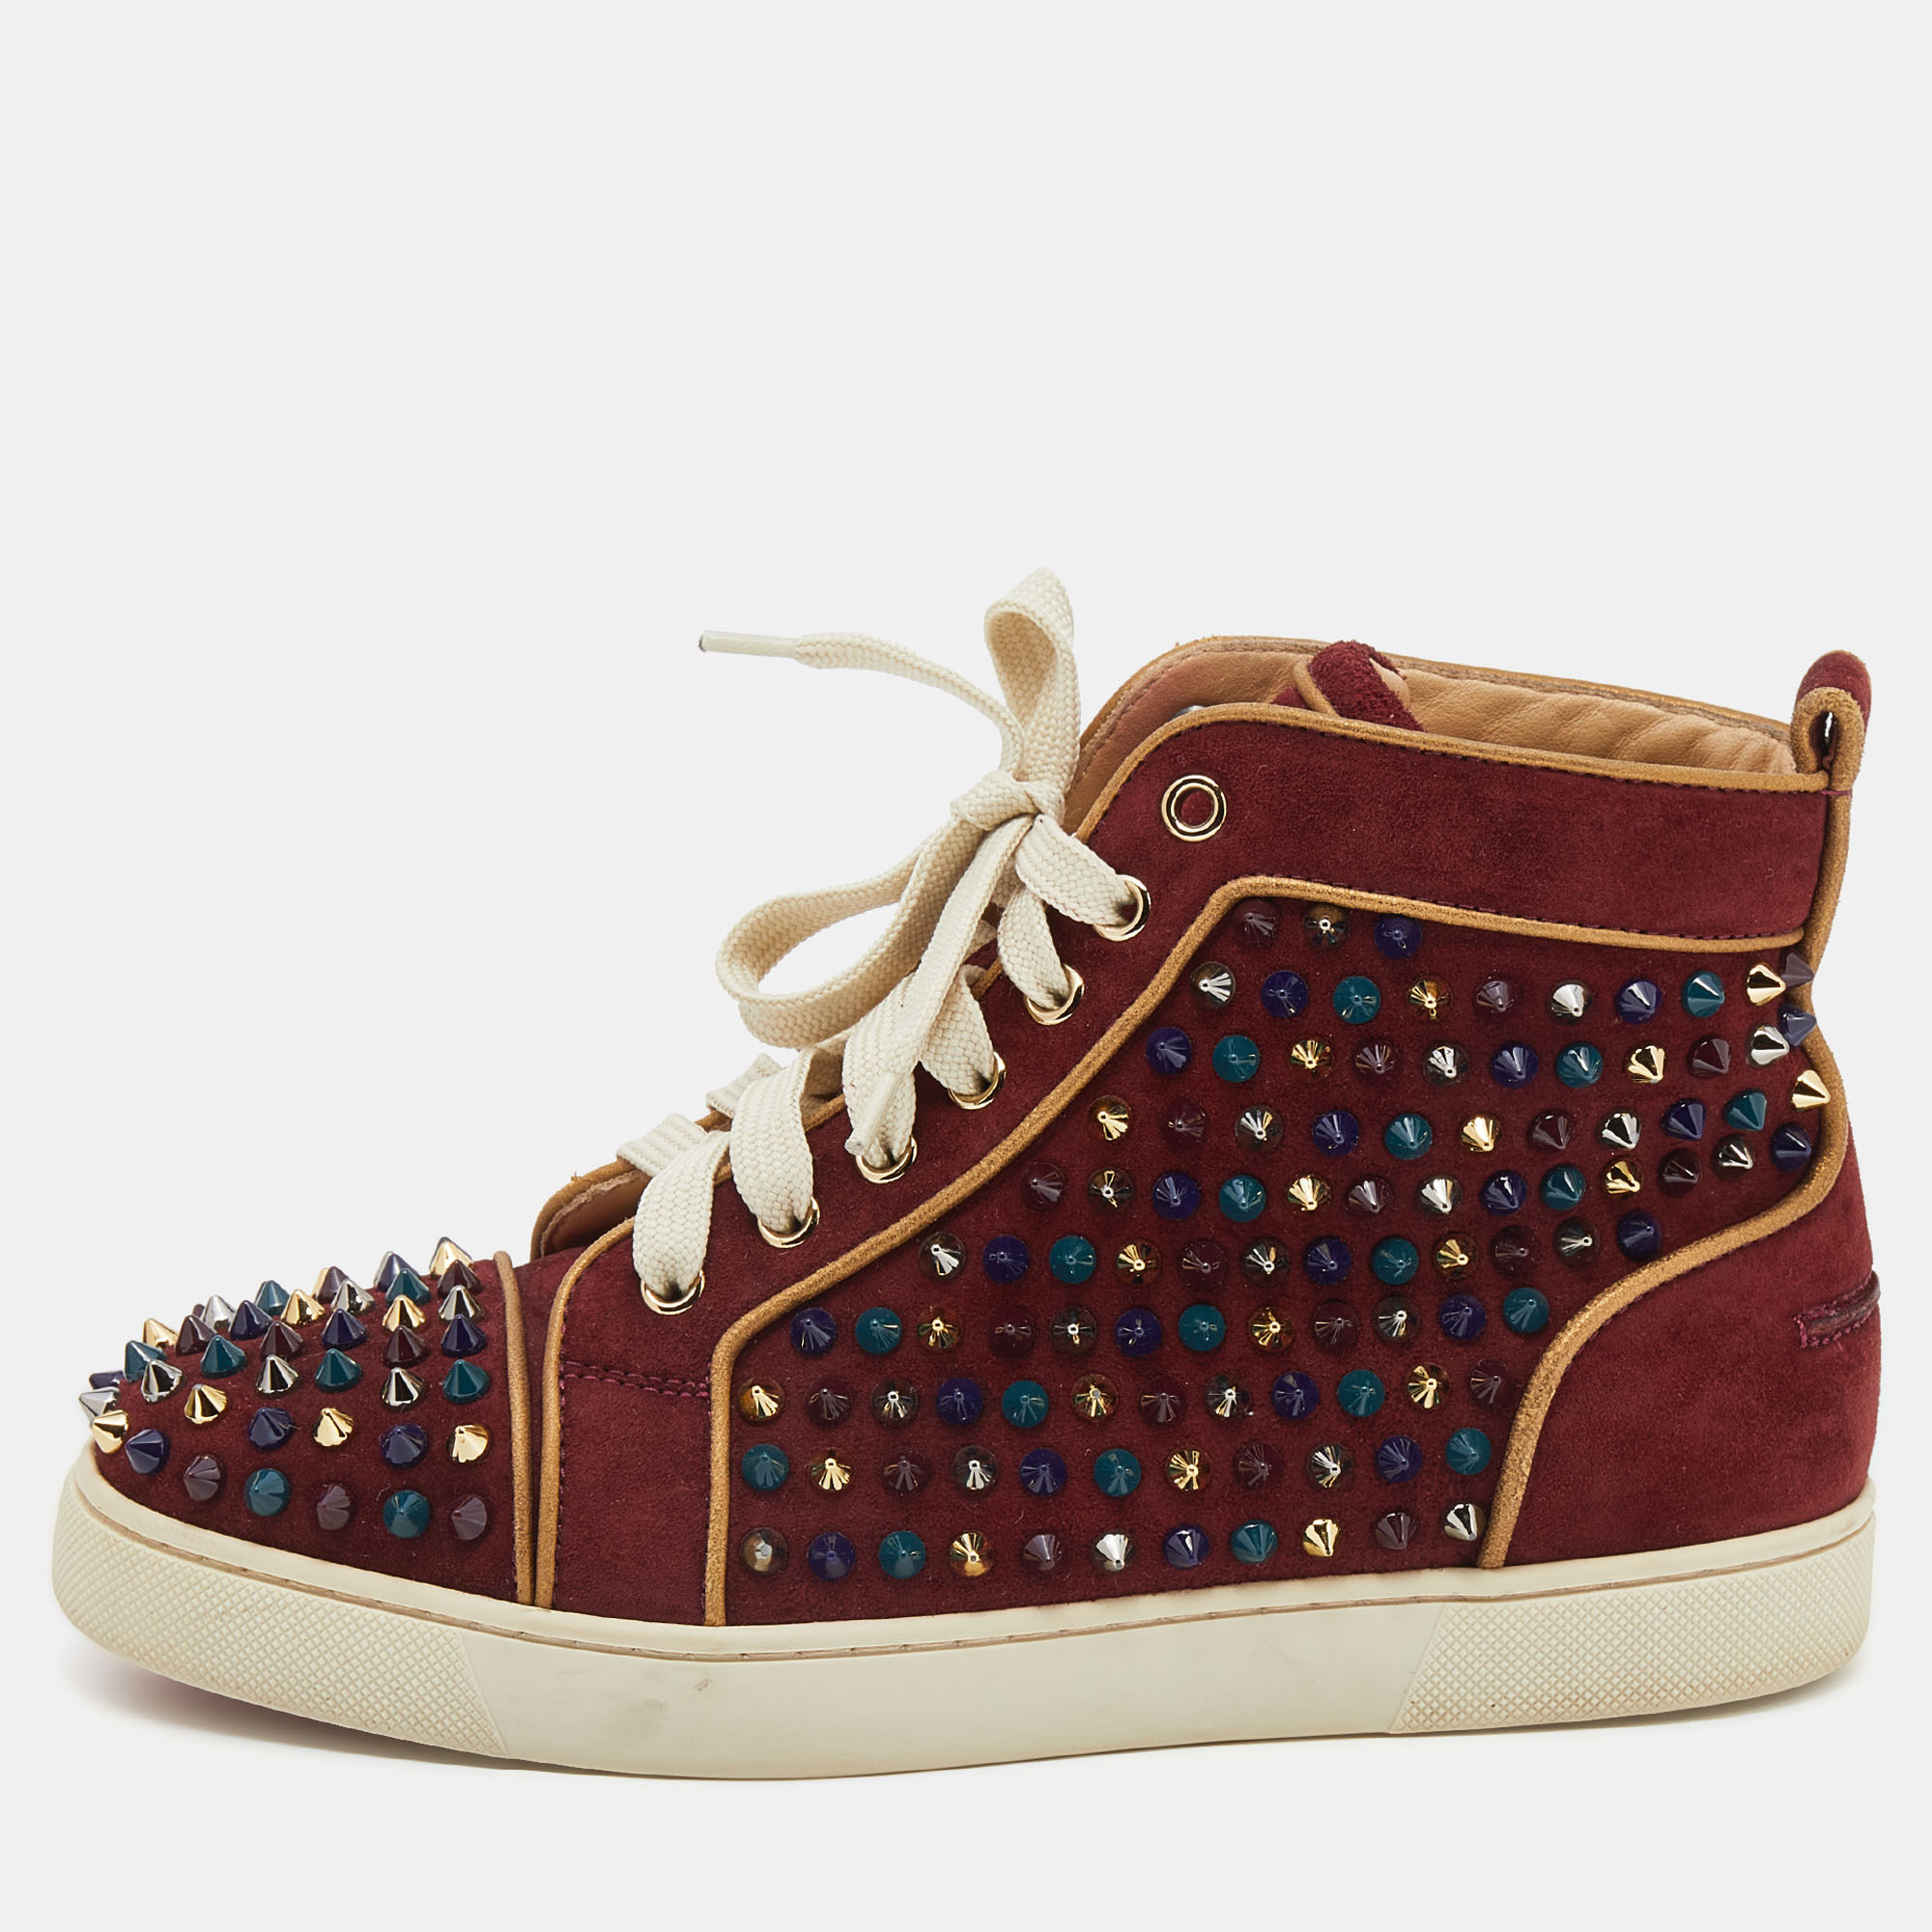 Christian Louboutin Burgundy Suede Louis Spikes High Top Sneakers Size 37.5